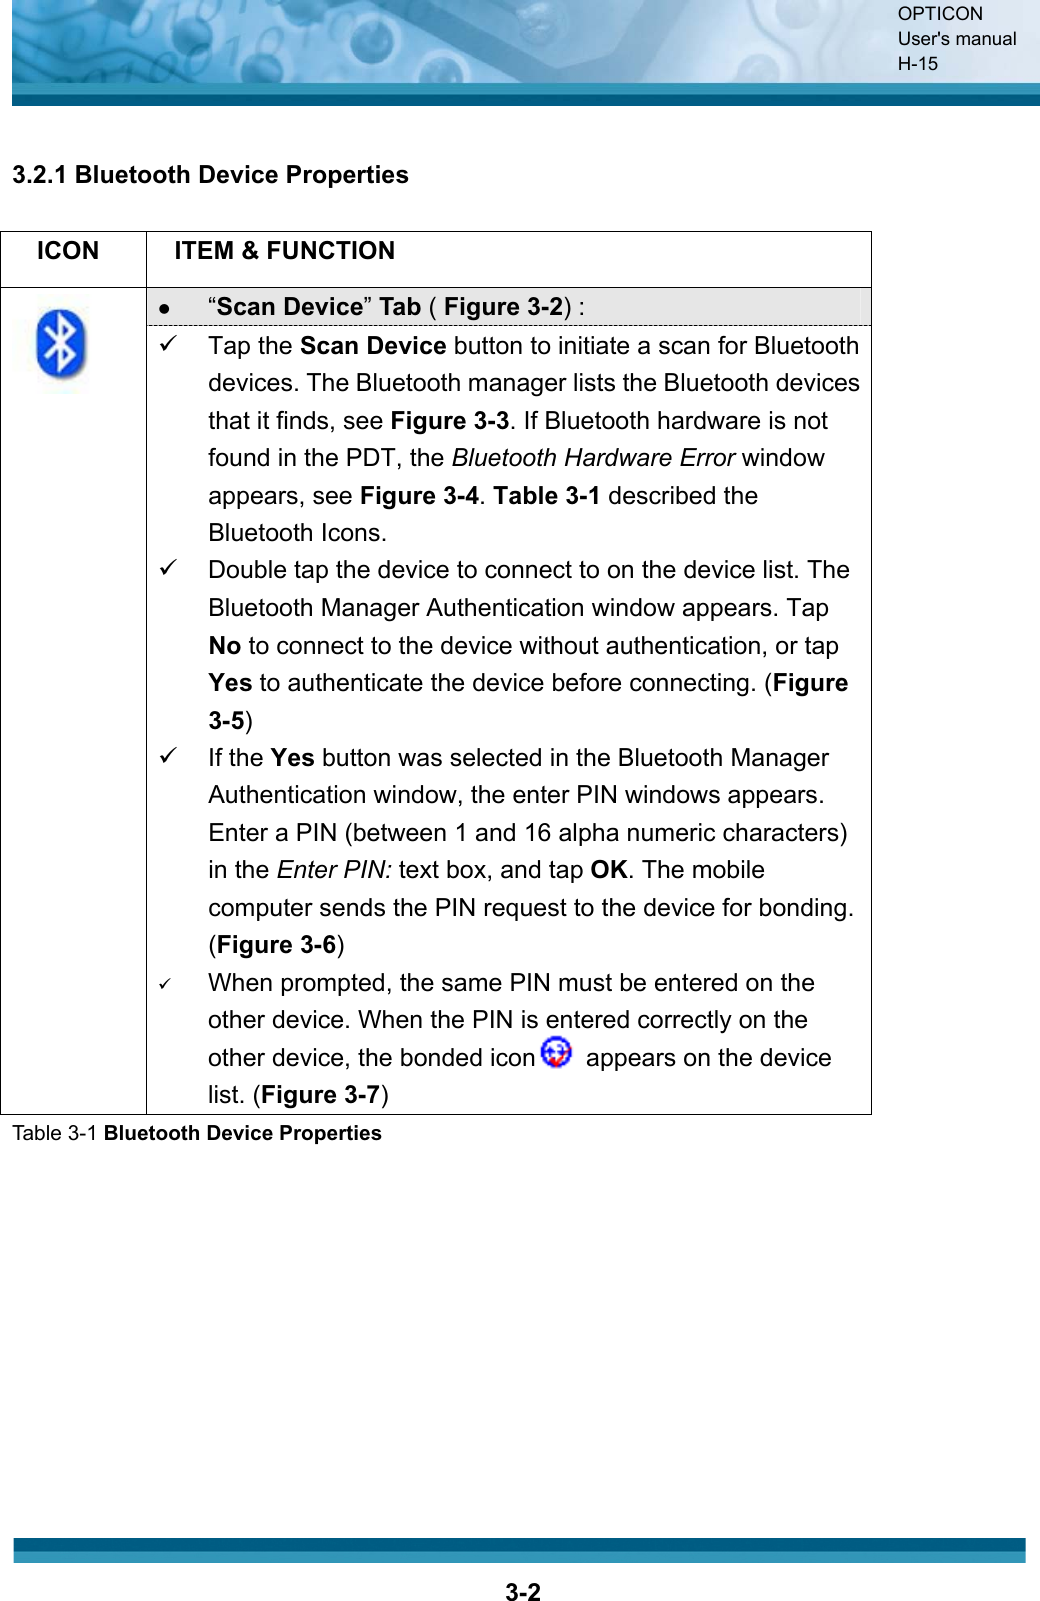 OPTICON User&apos;s manual H-153-23.2.1 Bluetooth Device Properties ICON ITEM &amp; FUNCTION z“Scan Device”Tab ( Figure 3-2) : 9 Tap the Scan Device button to initiate a scan for Bluetooth devices. The Bluetooth manager lists the Bluetooth devices that it finds, see Figure 3-3. If Bluetooth hardware is not found in the PDT, the Bluetooth Hardware Error window appears, see Figure 3-4. Table 3-1 described the Bluetooth Icons. 9  Double tap the device to connect to on the device list. The Bluetooth Manager Authentication window appears. Tap No to connect to the device without authentication, or tap Yes to authenticate the device before connecting. (Figure3-5)9 If the Yes button was selected in the Bluetooth Manager Authentication window, the enter PIN windows appears. Enter a PIN (between 1 and 16 alpha numeric characters) in the Enter PIN: text box, and tap OK. The mobile computer sends the PIN request to the device for bonding. (Figure 3-6)9When prompted, the same PIN must be entered on the other device. When the PIN is entered correctly on the other device, the bonded icon        appears on the device list. (Figure 3-7)Table 3-1 Bluetooth Device Properties 